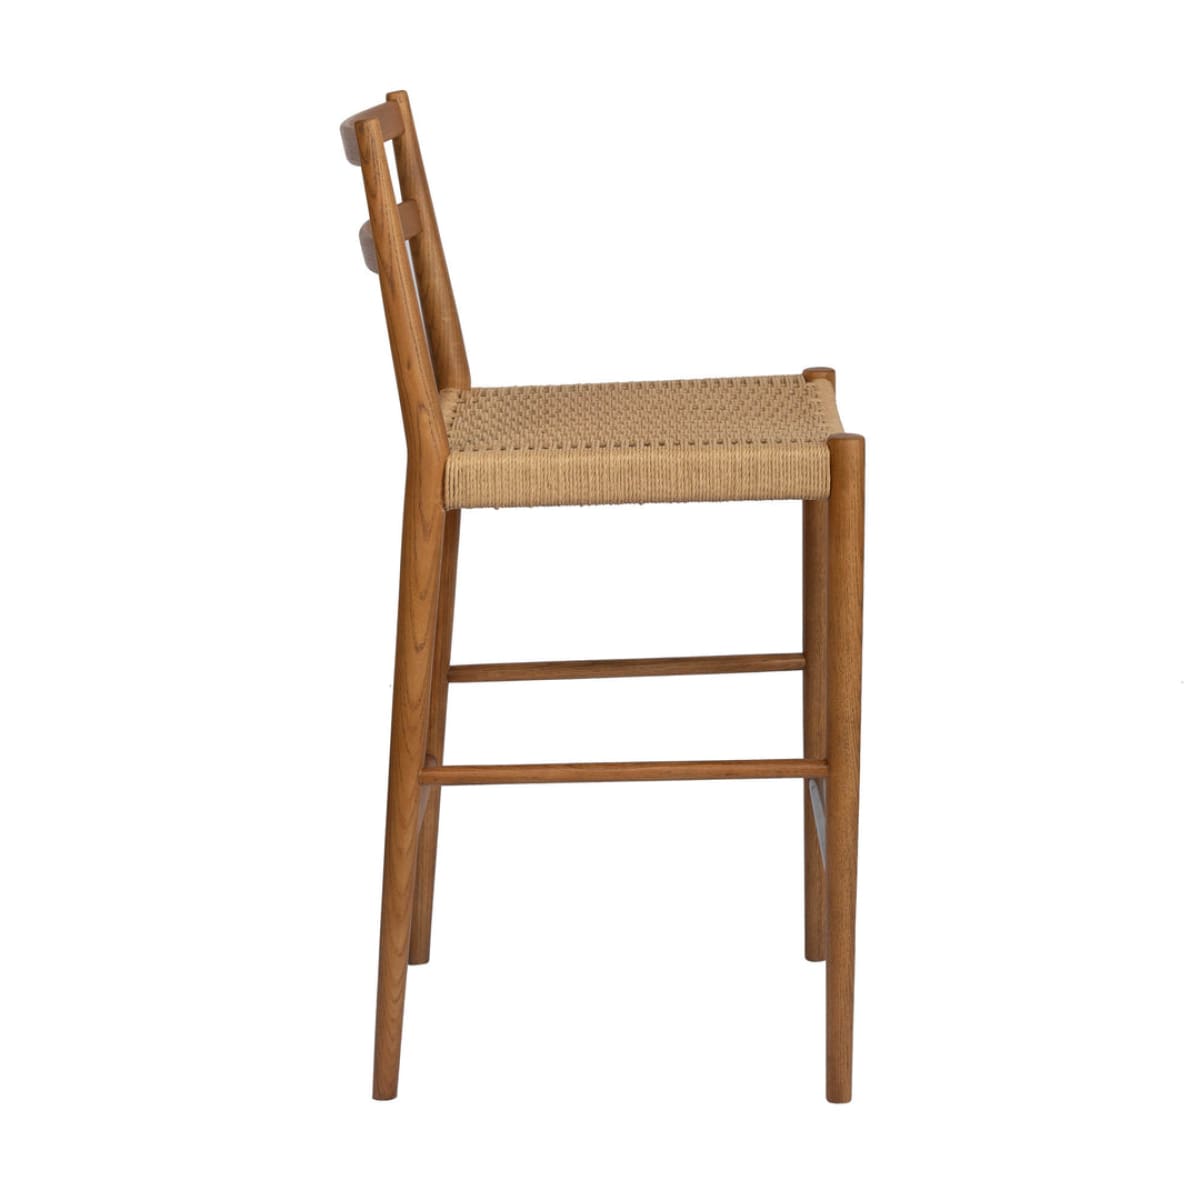 Jakarta Counter Stool With Back - Walnut/Natural Woven Seat - lh-import-stools